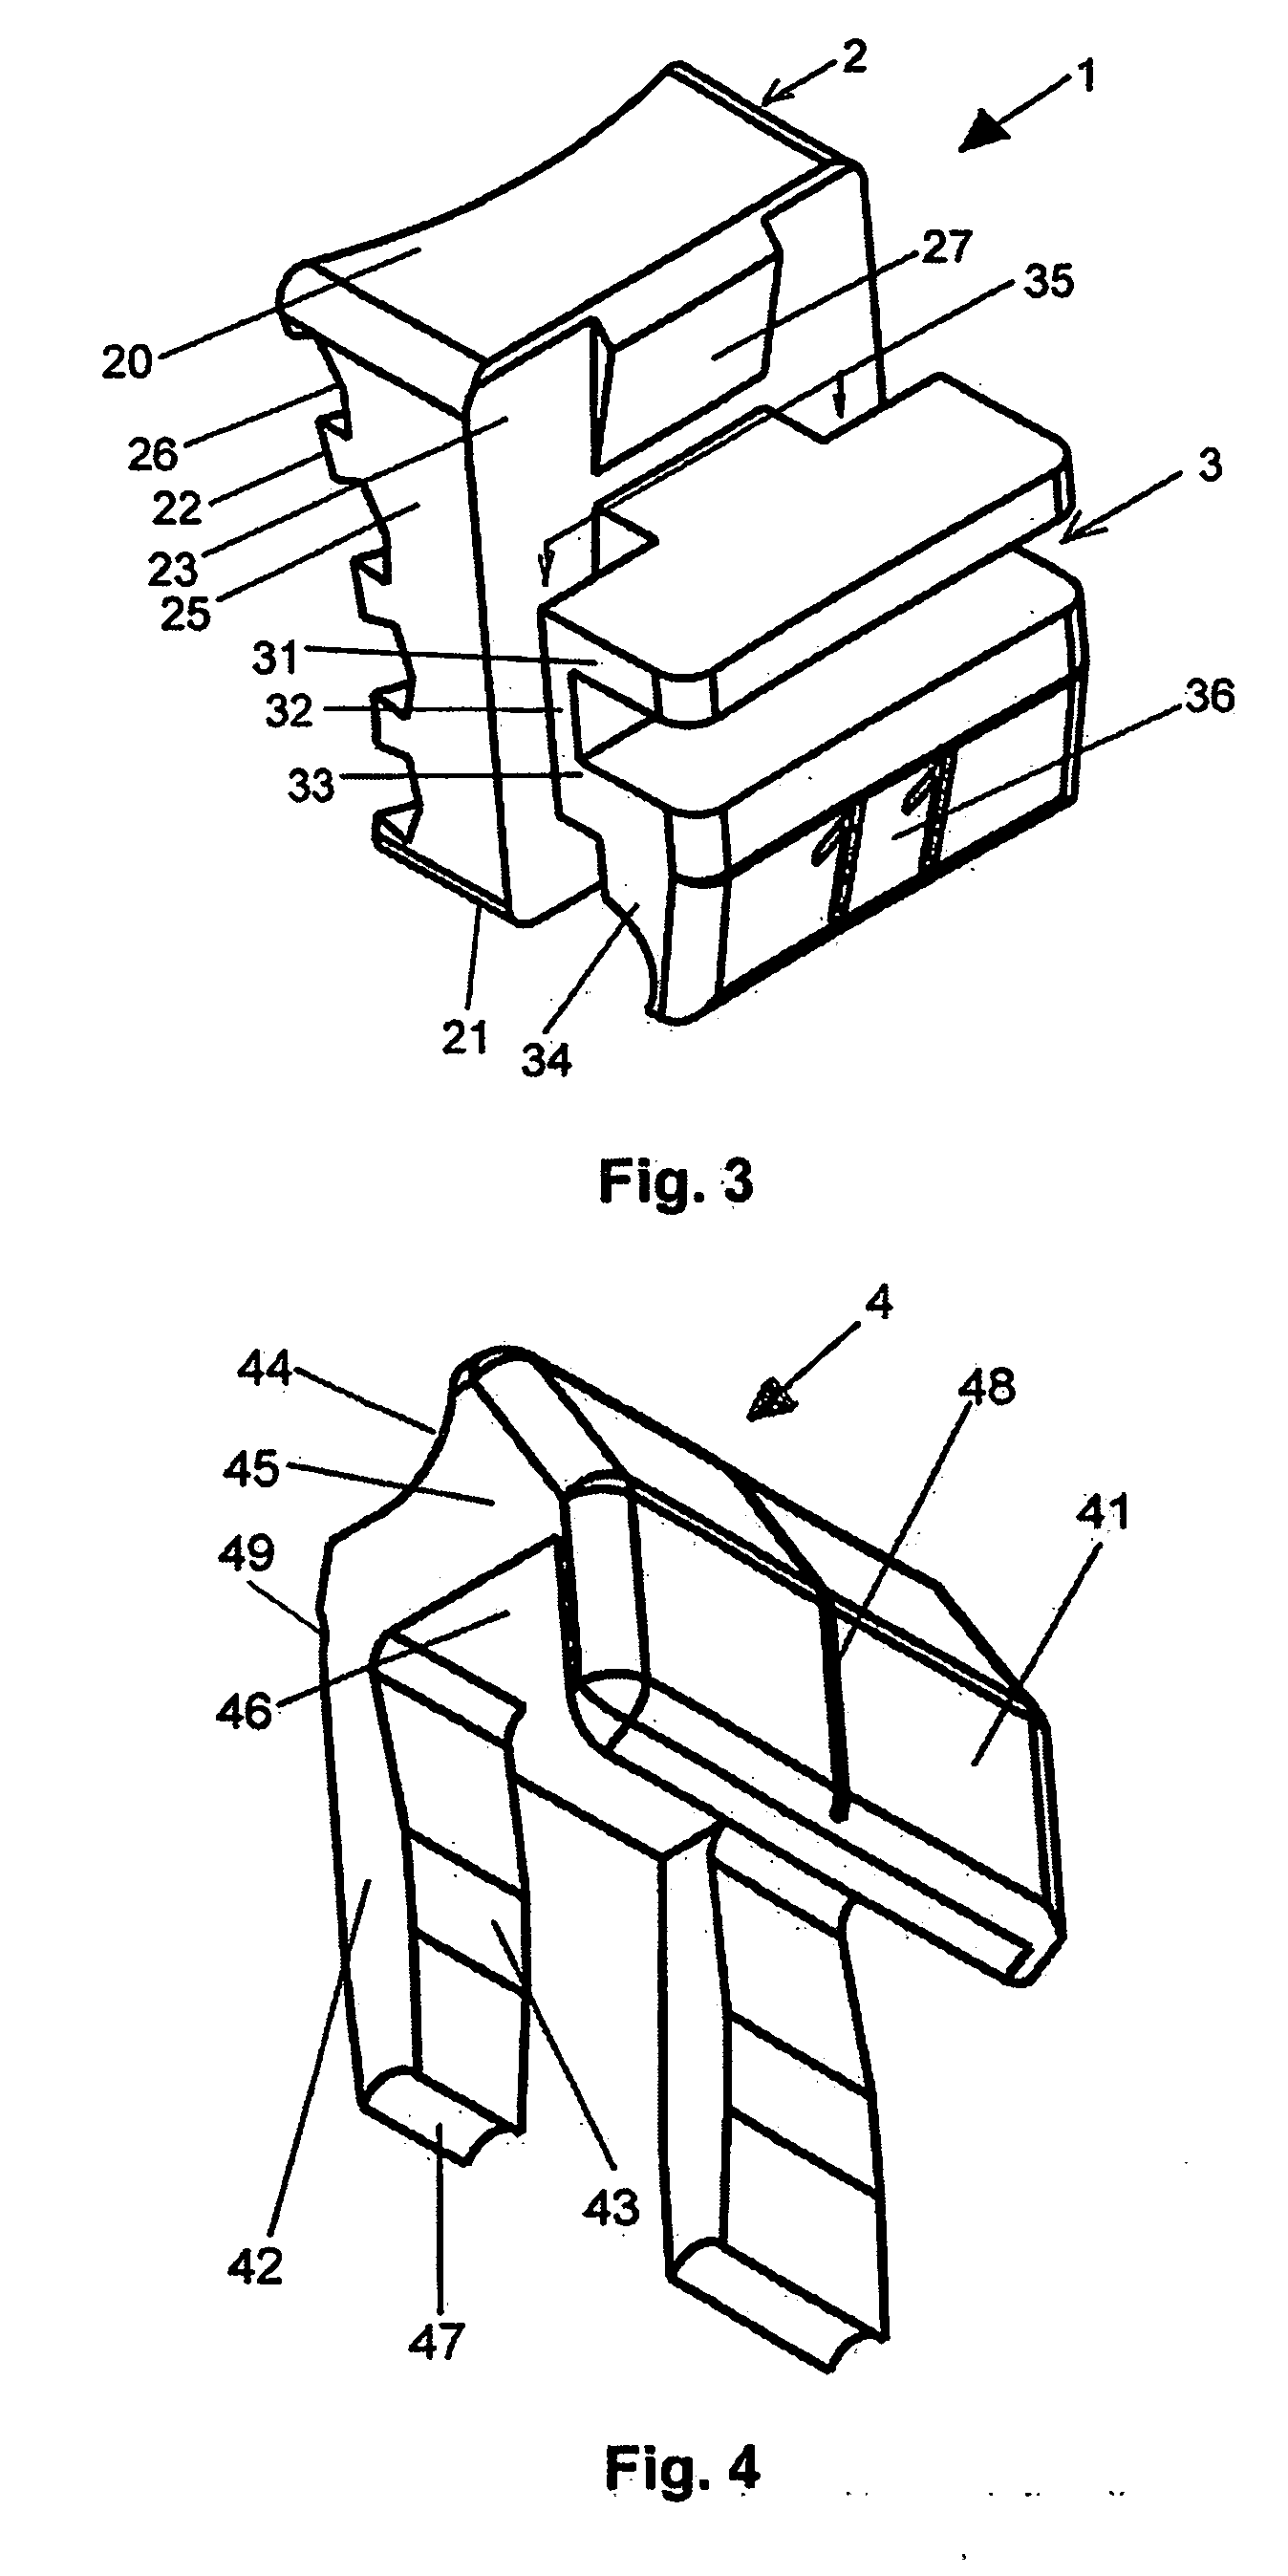 Self-ligating bracket comprising lateral runners